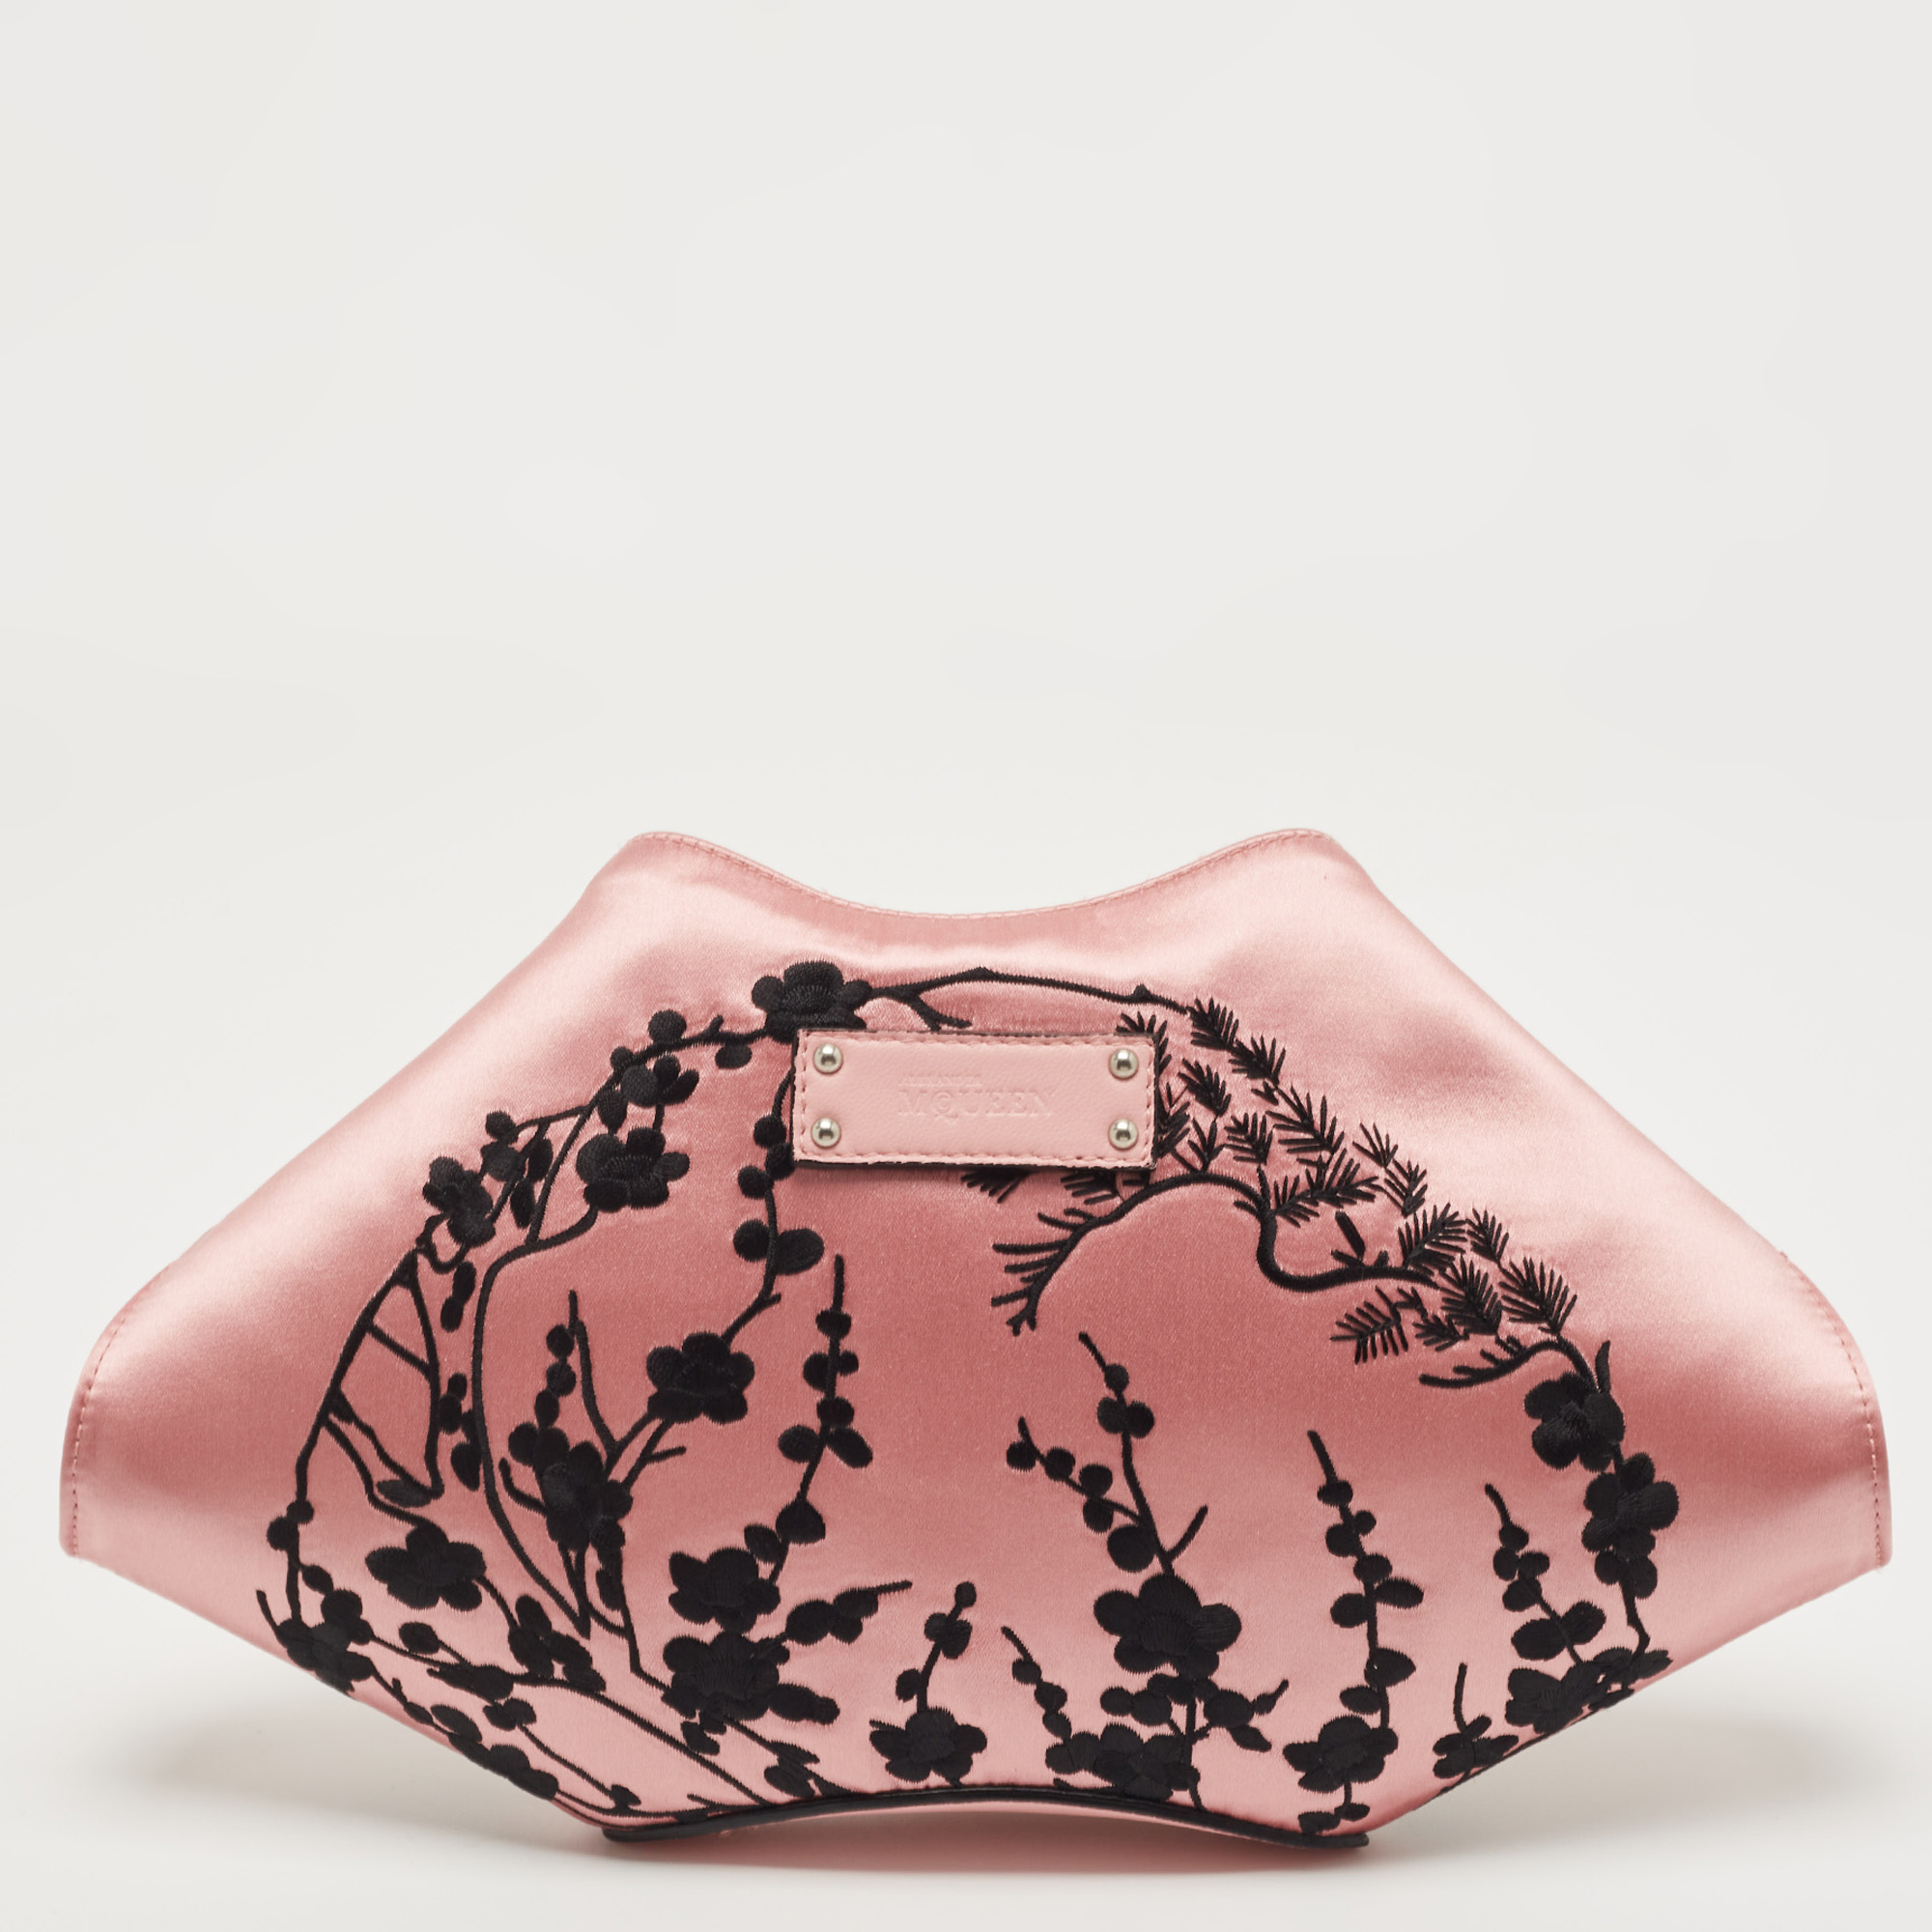 Alexander McQueen Pink/Black Embroidered Satin And Leather De Manta Clutch